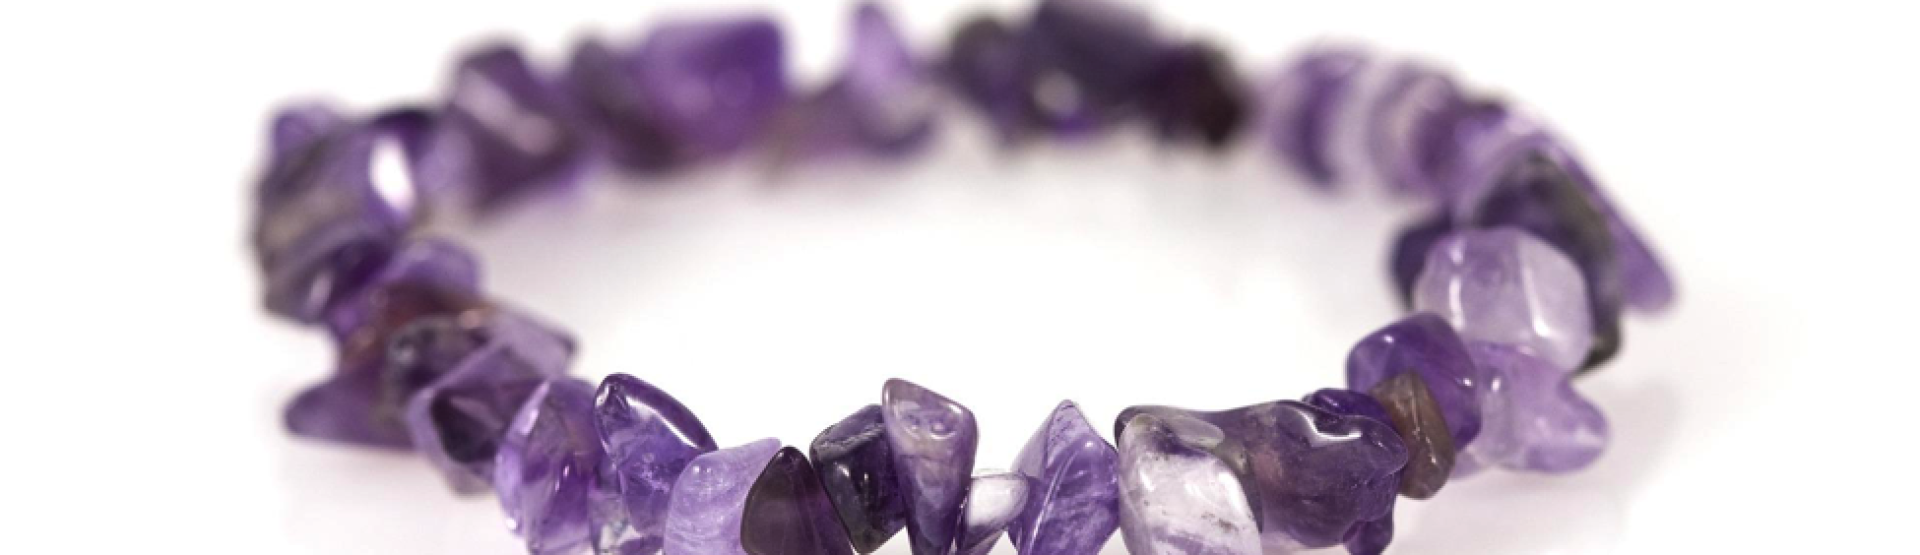 Amethyst Crystal Meaning and Uses | Amethyst crystal meaning, Crystals  healing properties, Spiritual crystals